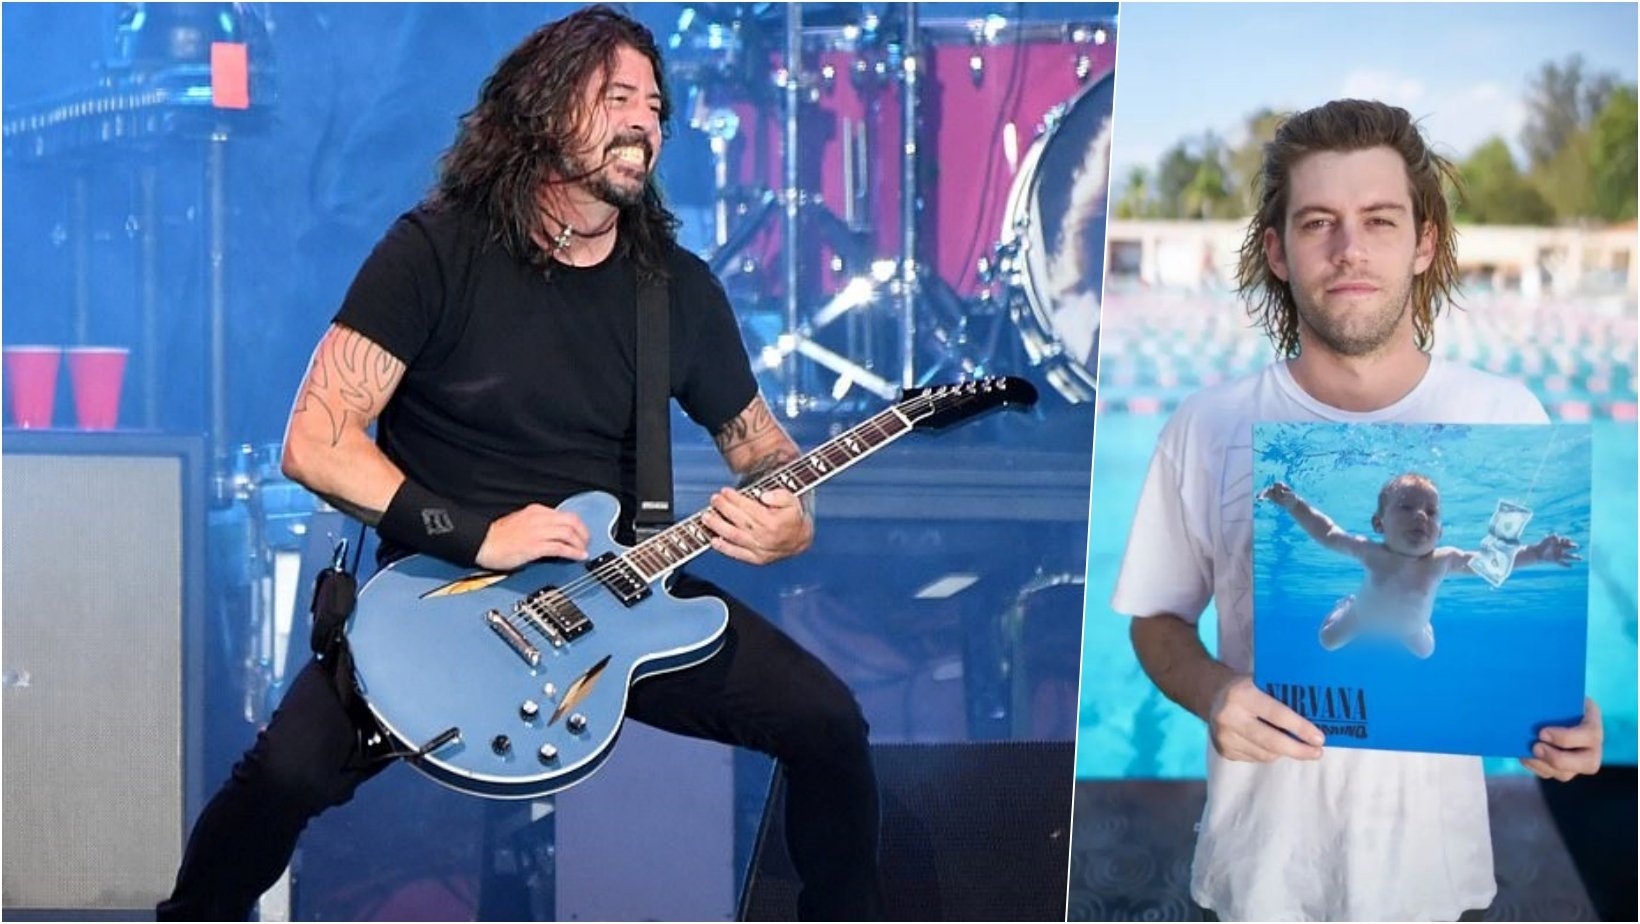 6 facebook cover 7.jpg?resize=412,232 - David Grohl Reacts On Lawsuit Against Nirvana’s “Nevermind” Album Cover